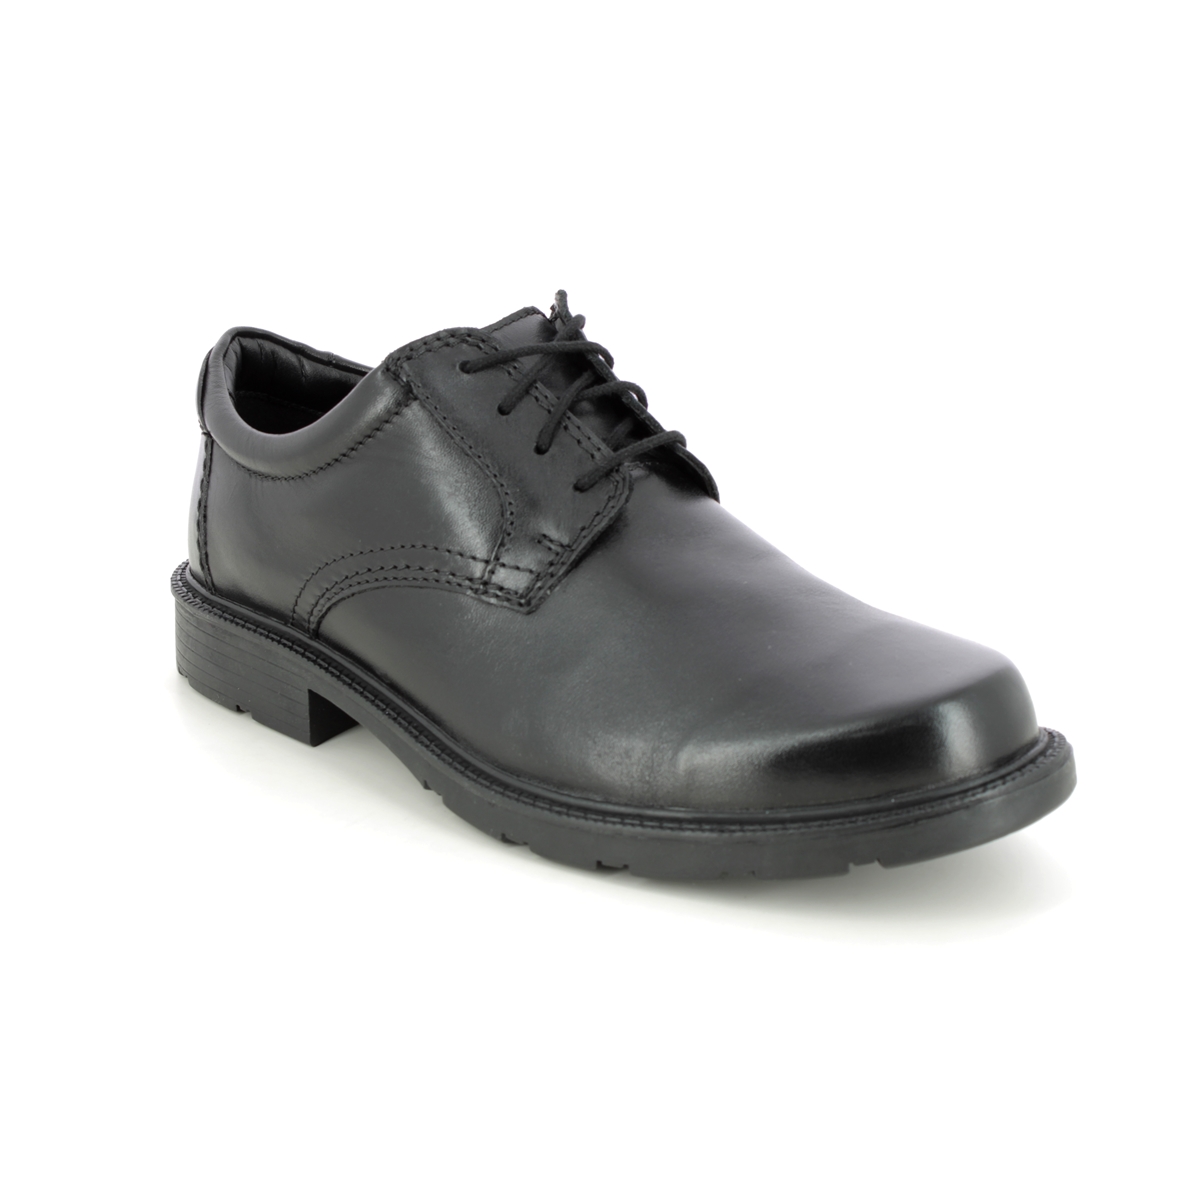 Clarks Kerton Lace Black leather Mens formal shoes 6560-57G in a Plain Leather in Size 12